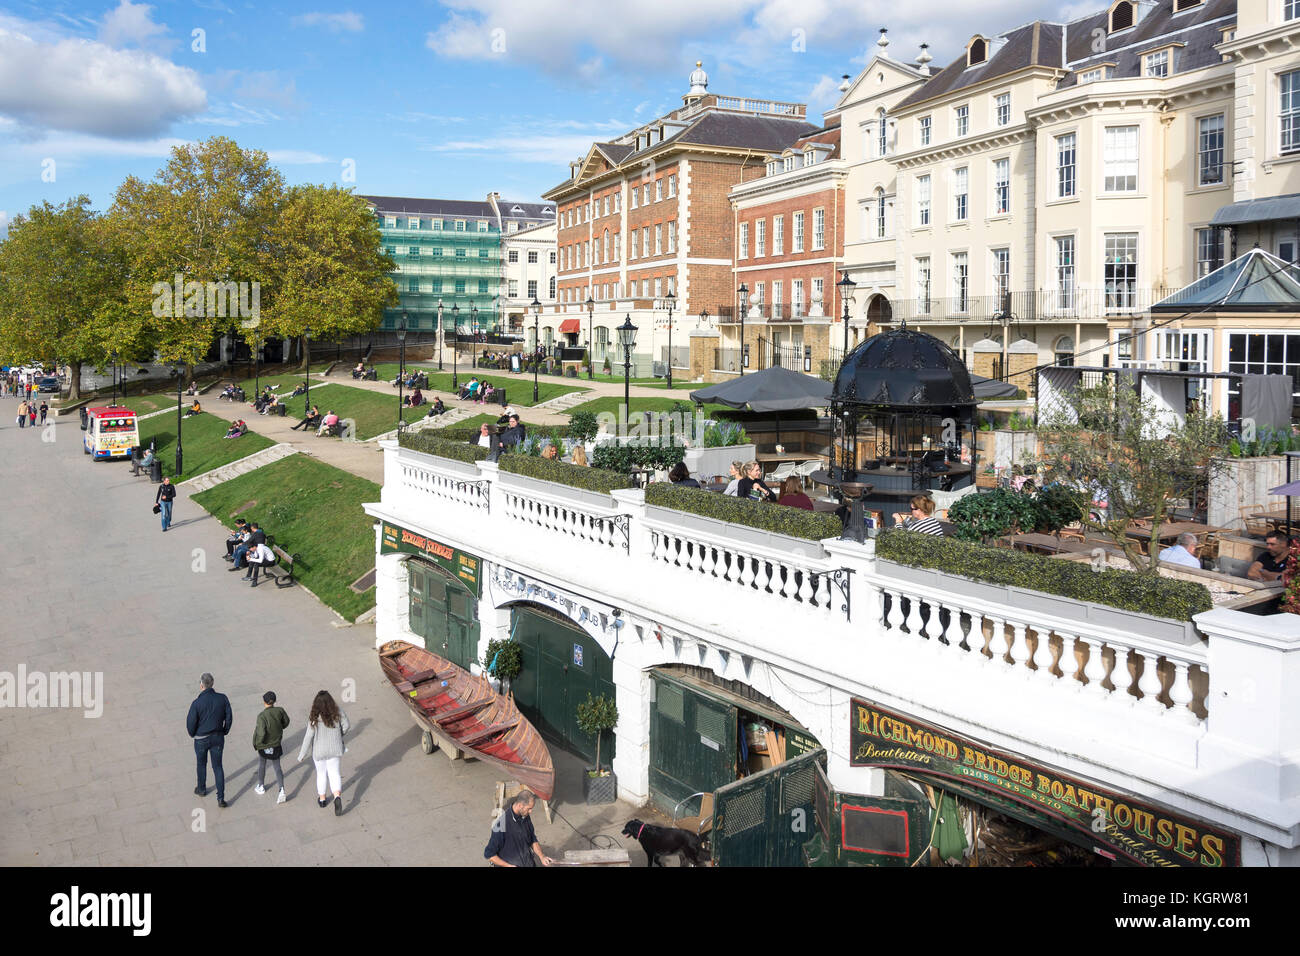 Pitcher & Piano Bar terrace overlooking River Thames, Richmond, London Borough of Richmond upon Thames, Greater London, England, United Kingdom Stock Photo